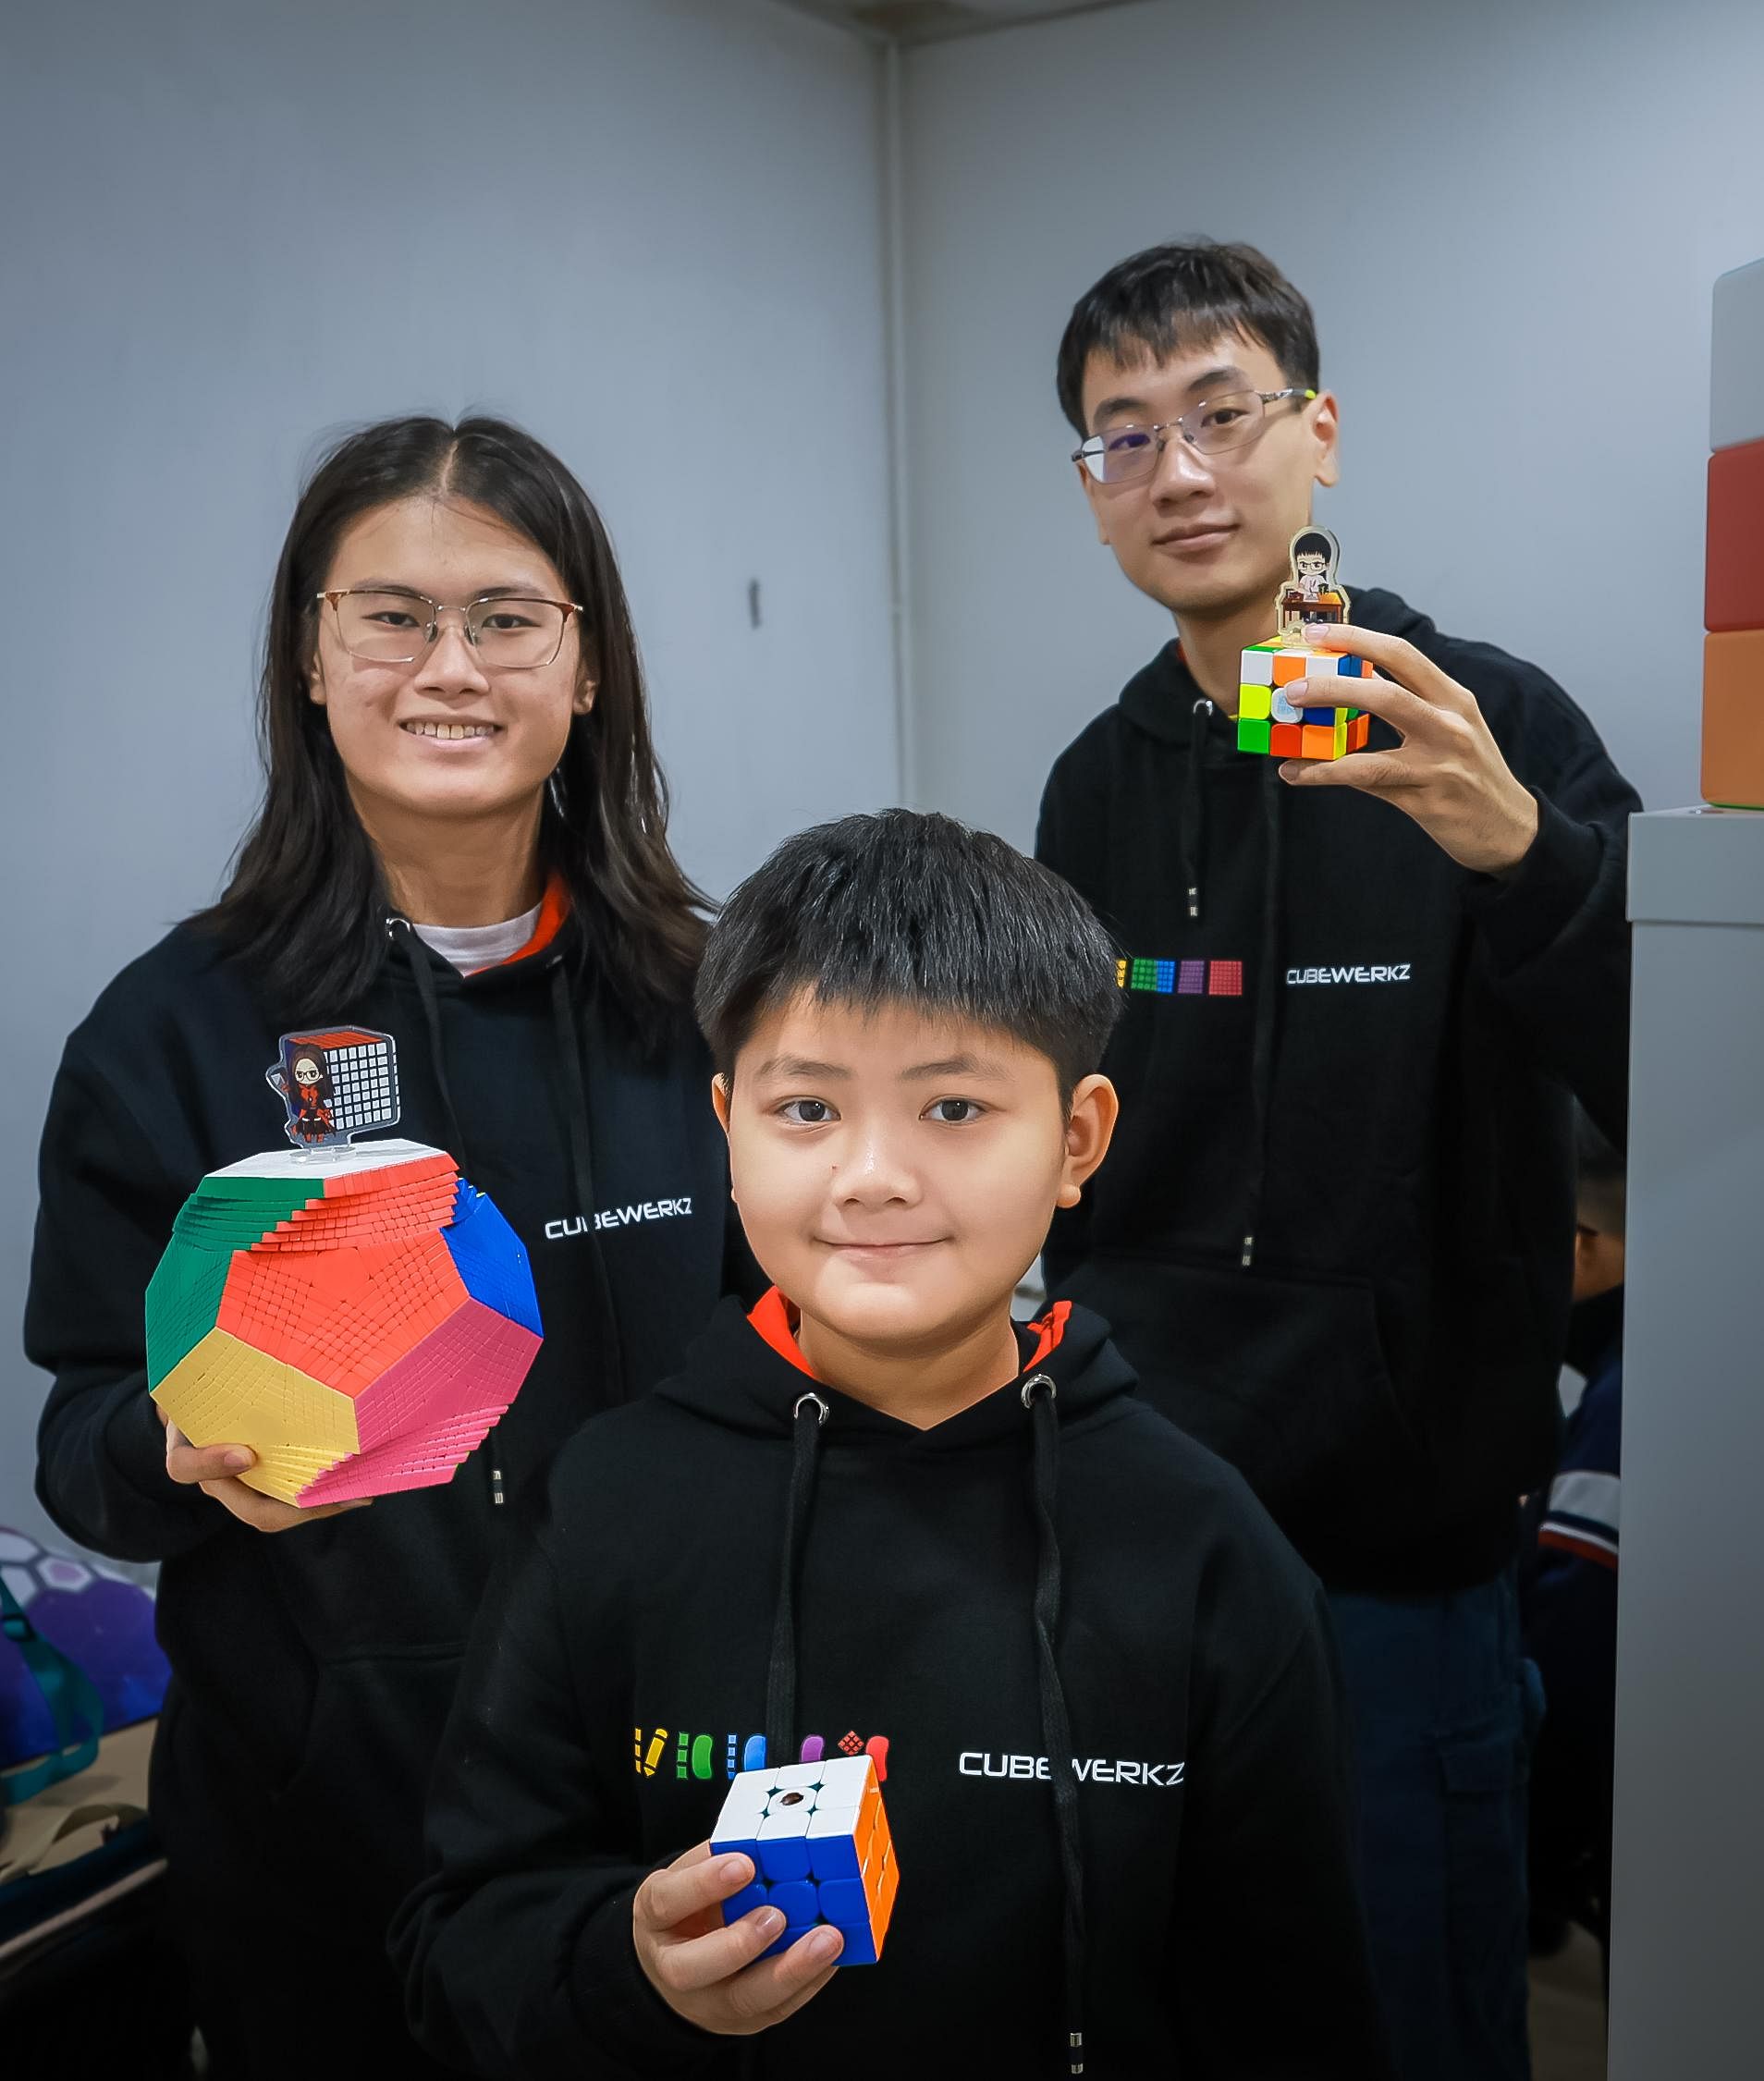 How does a WCA Rubik's Cube competition work?, Multimedia